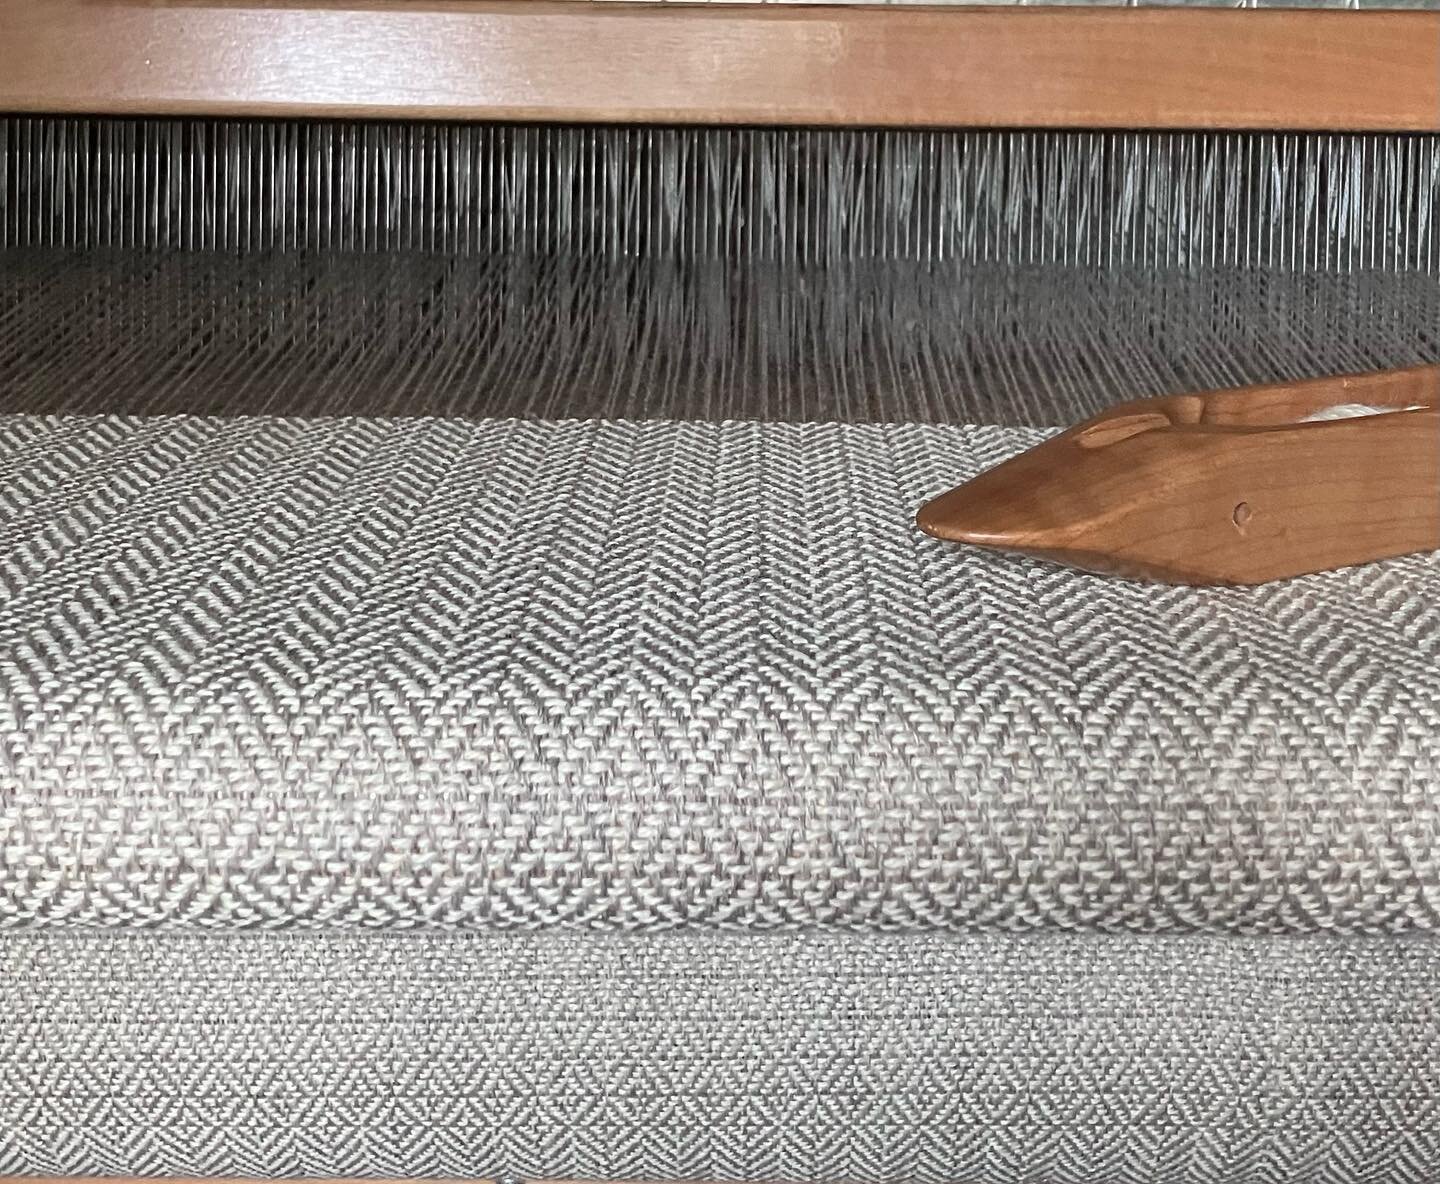 The second out of three of throw blanket patterns made with exquisite undyed Cotswold wool from @tamarack_farms 

The patterns in this series reflect Tamarack Farms&rsquo; deep commitment to environmental practices like reserving 65% of their land fo